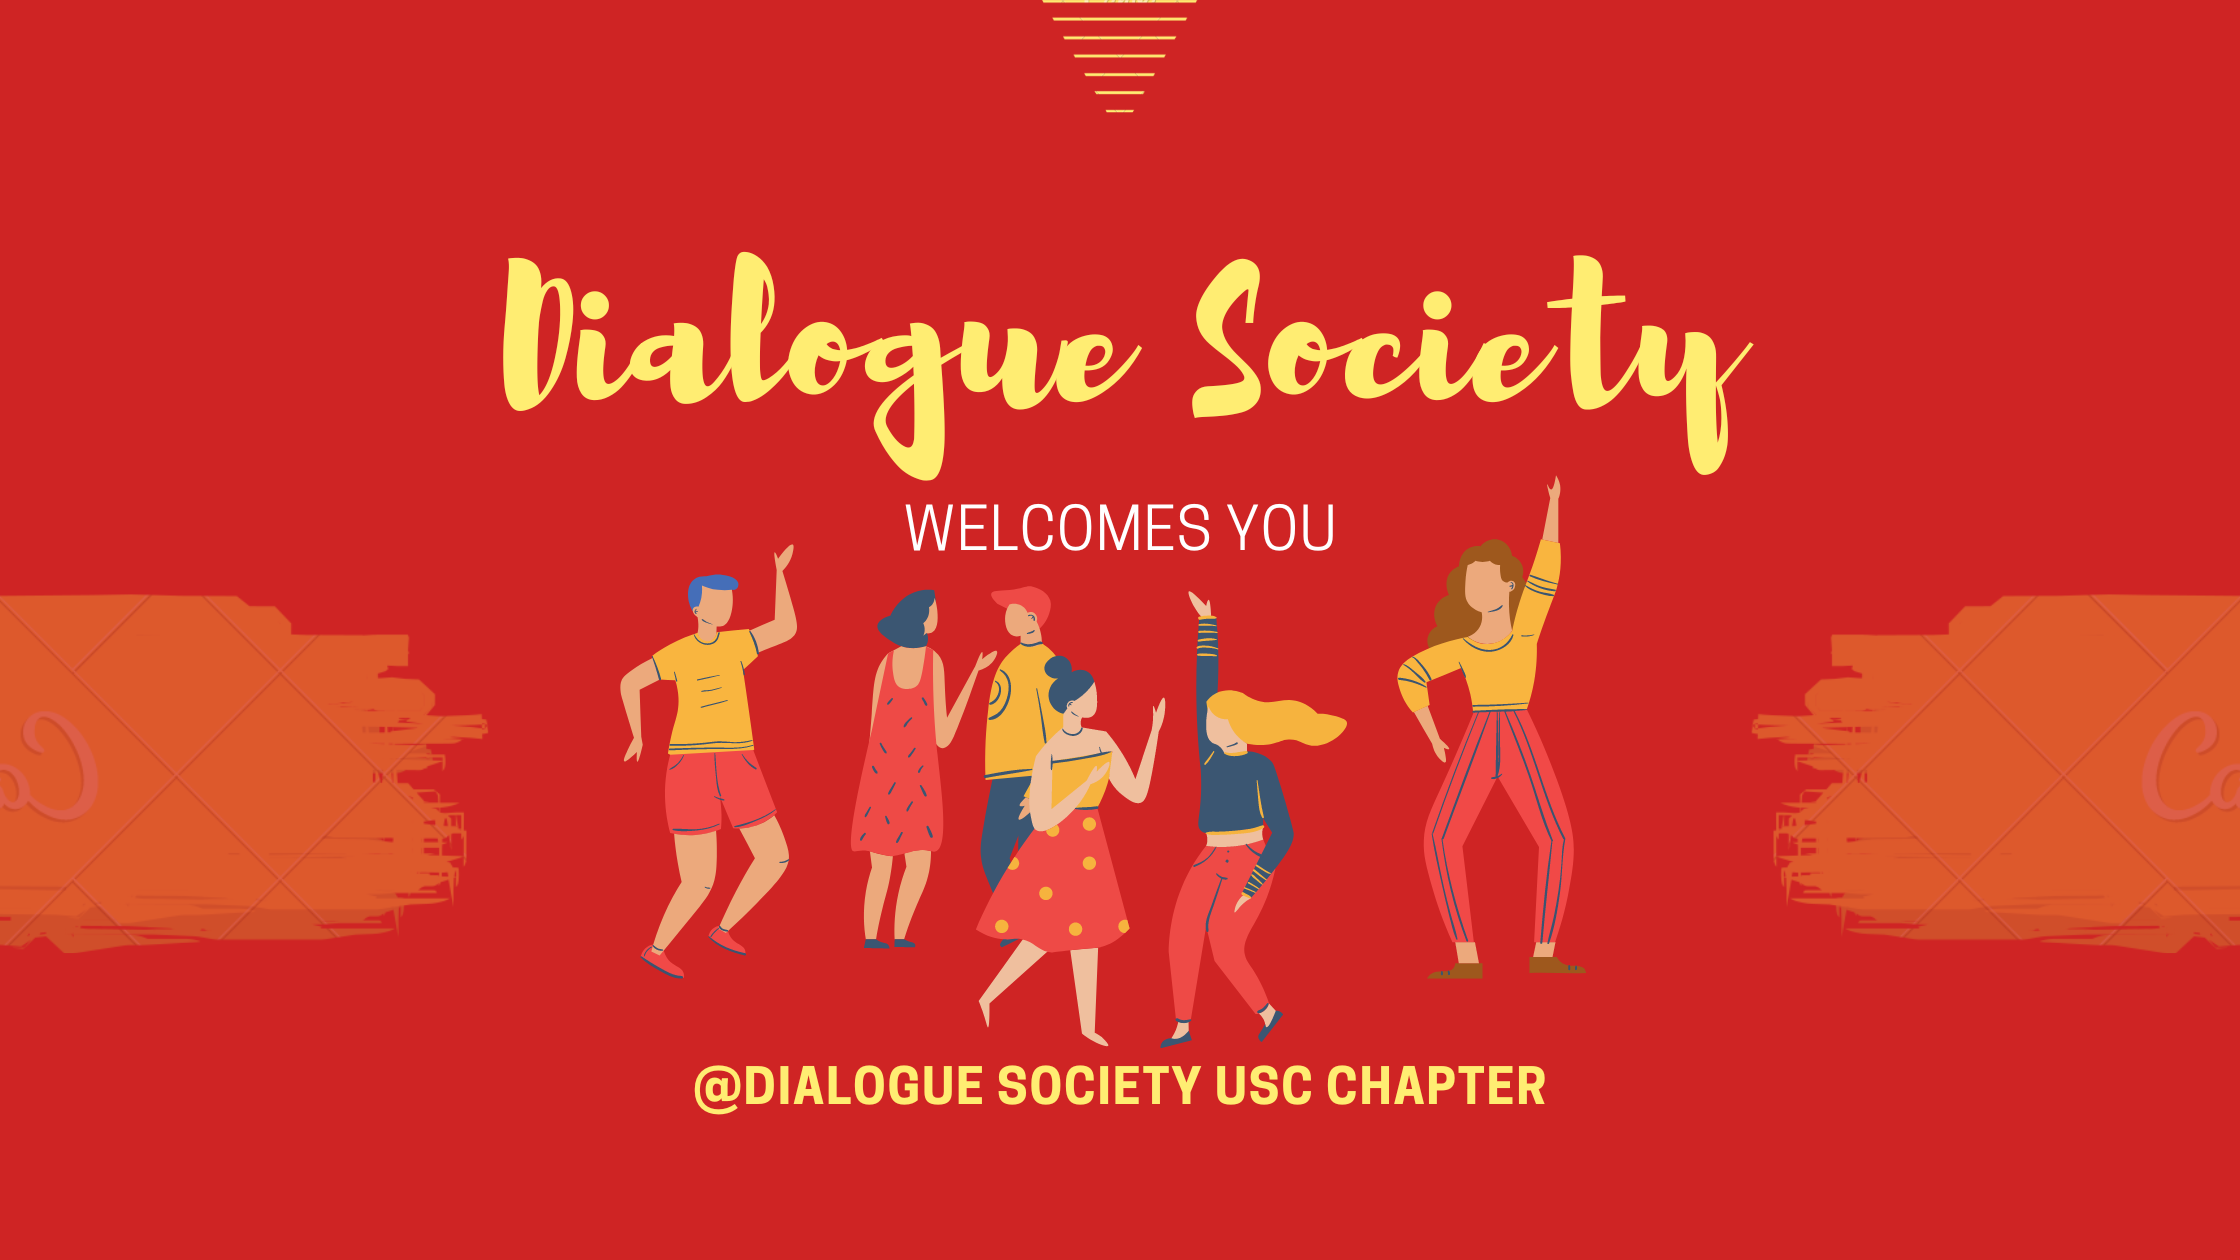 DS-Website-Dialogue-Society-USC-welcomes-you